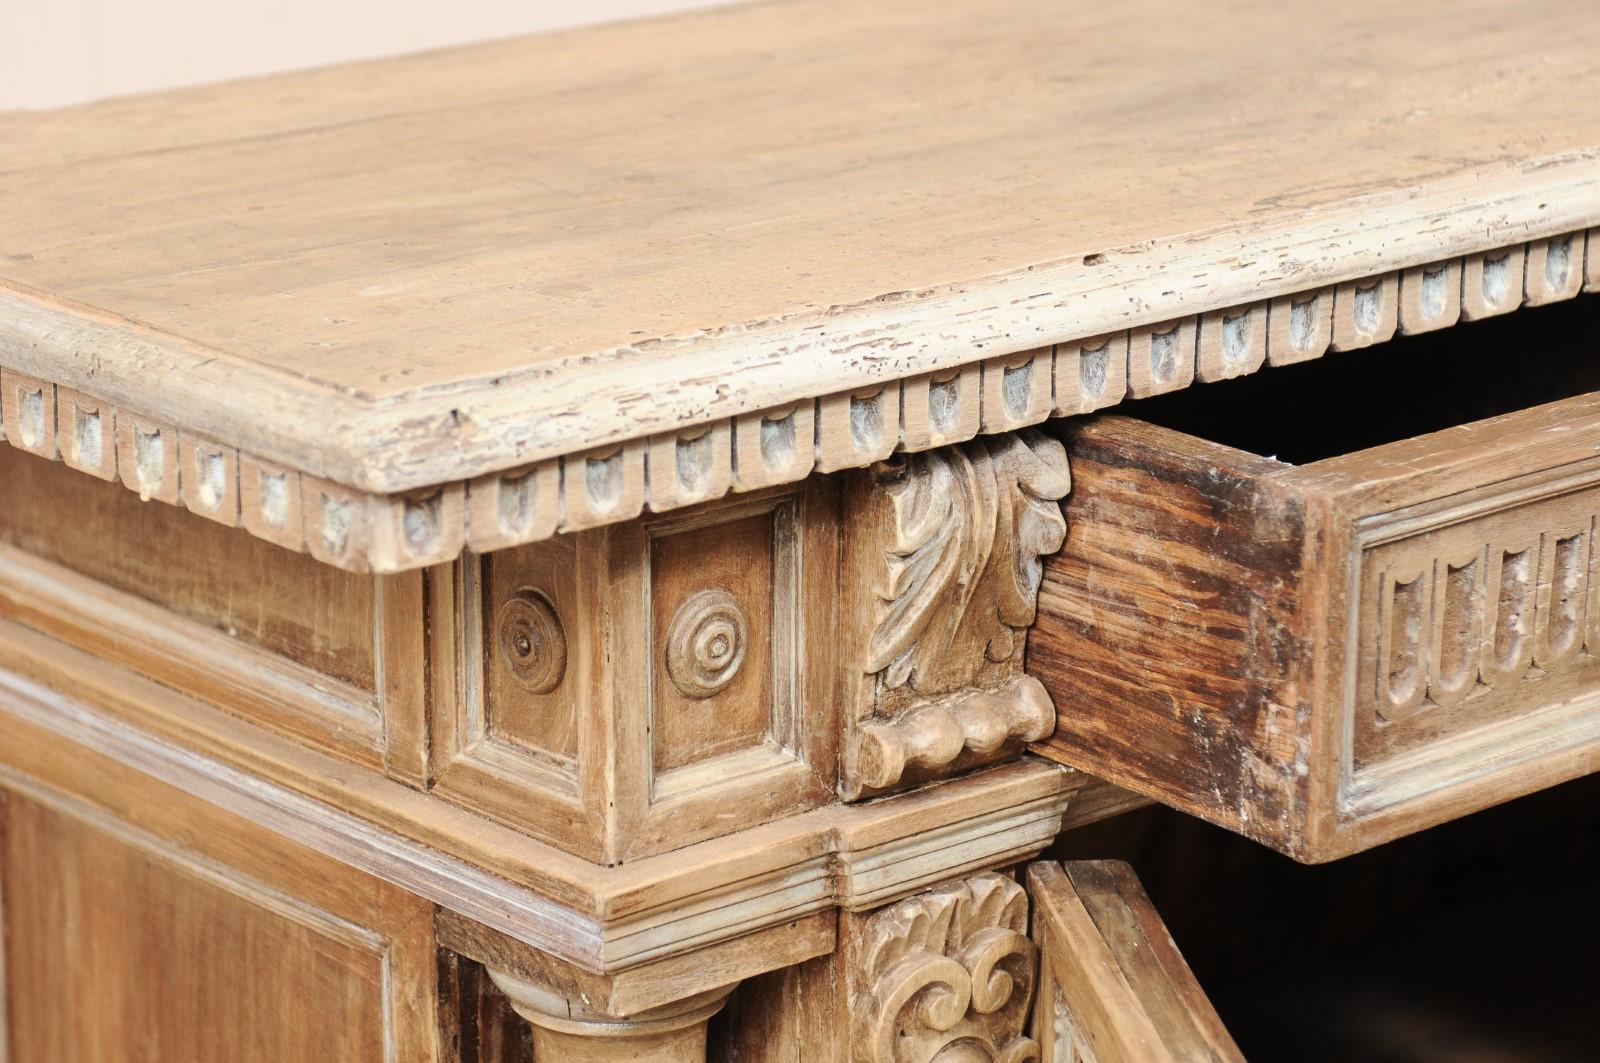 Italian Elaborately-Carved Wood Buffet Console Cabinet, Late 19th Century For Sale 3